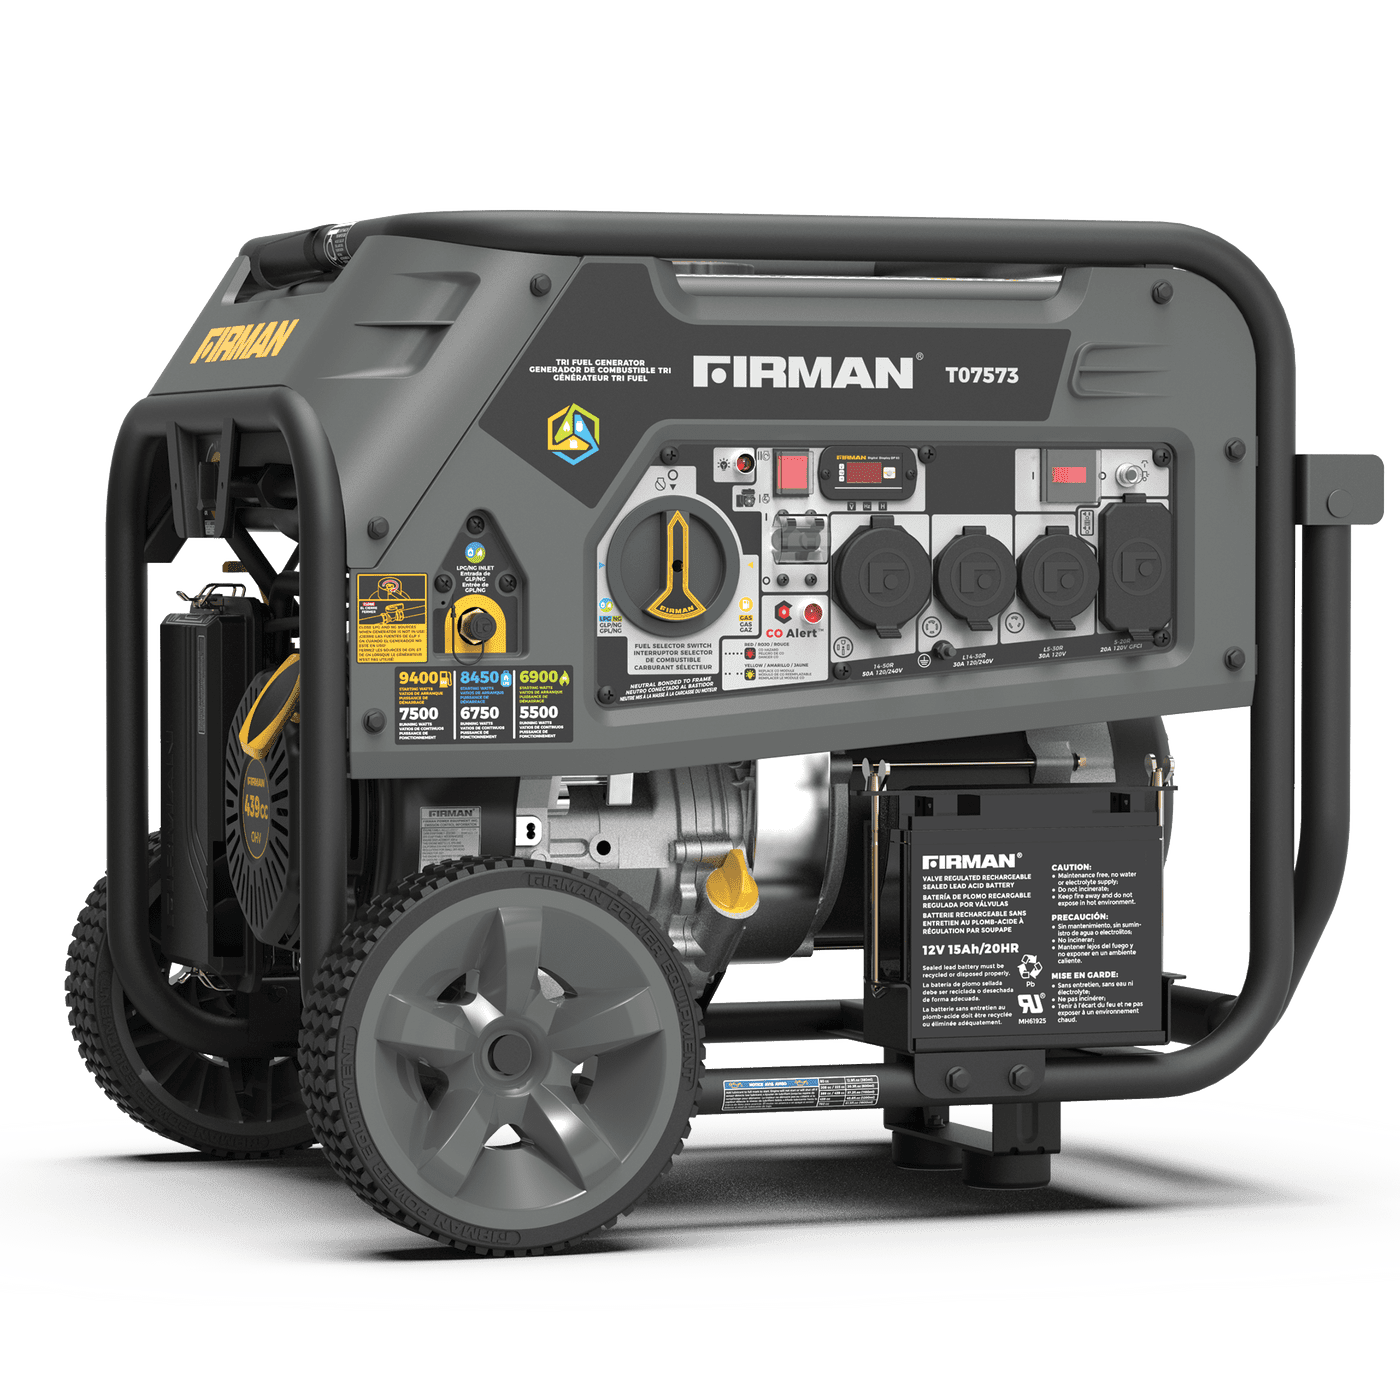 Firman Generator – Choose the Right Size and Model for Your Needs